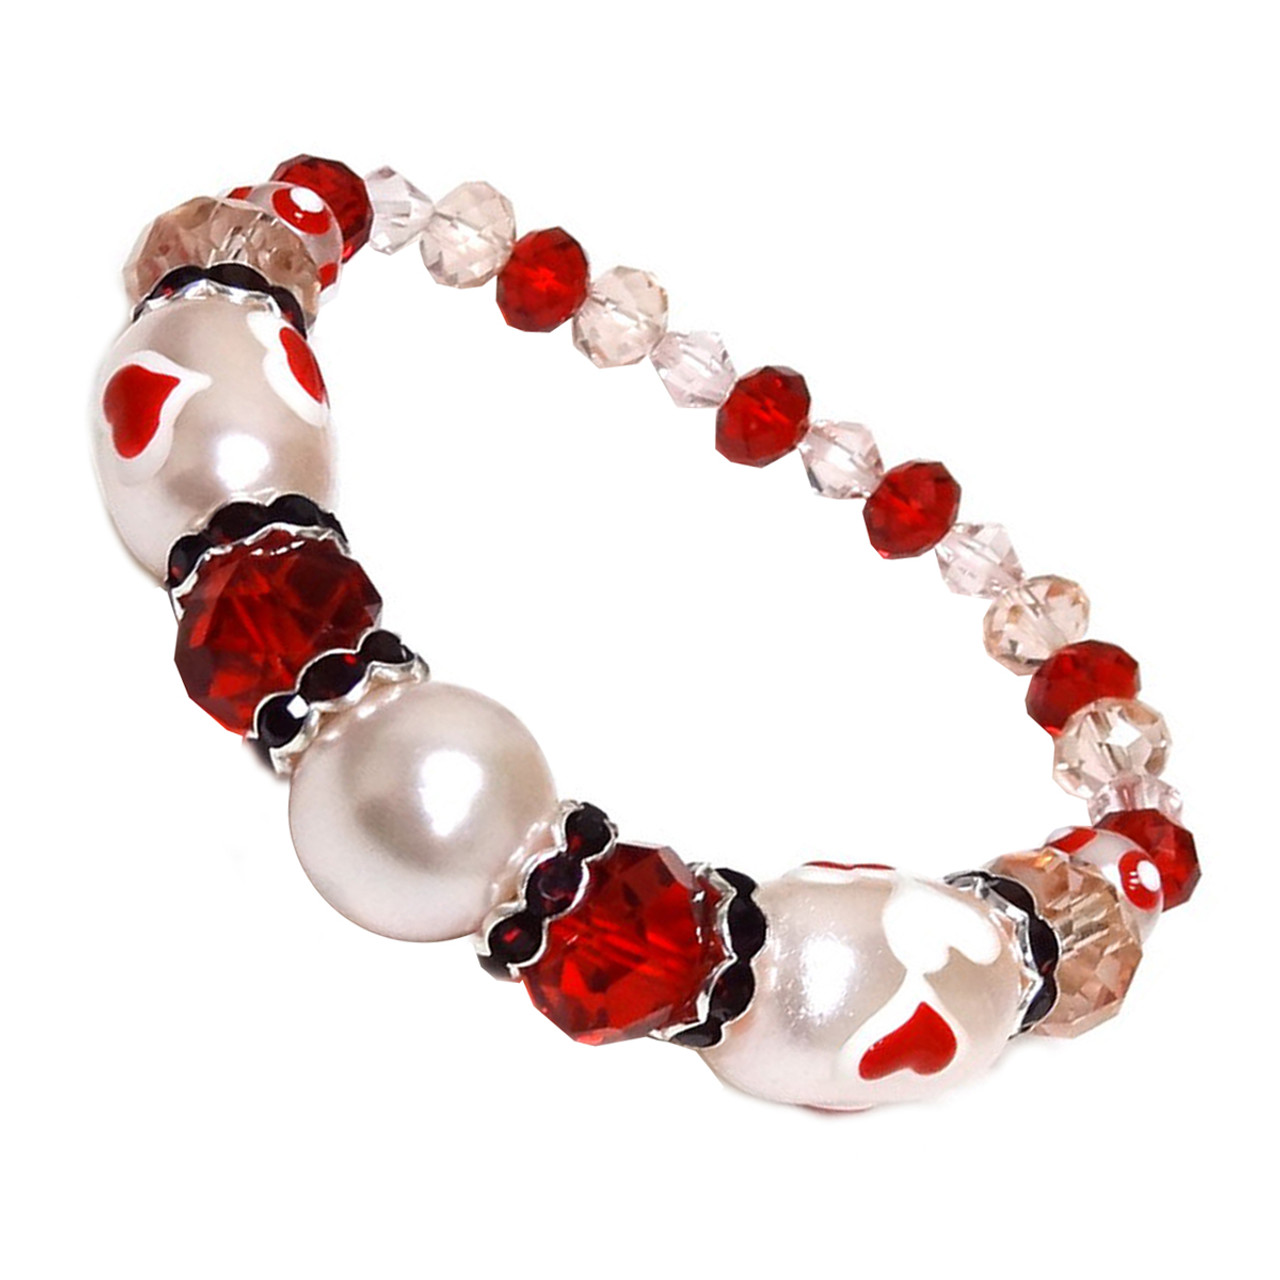 How to make a beautiful bracelet for Valentine's Day. Beading